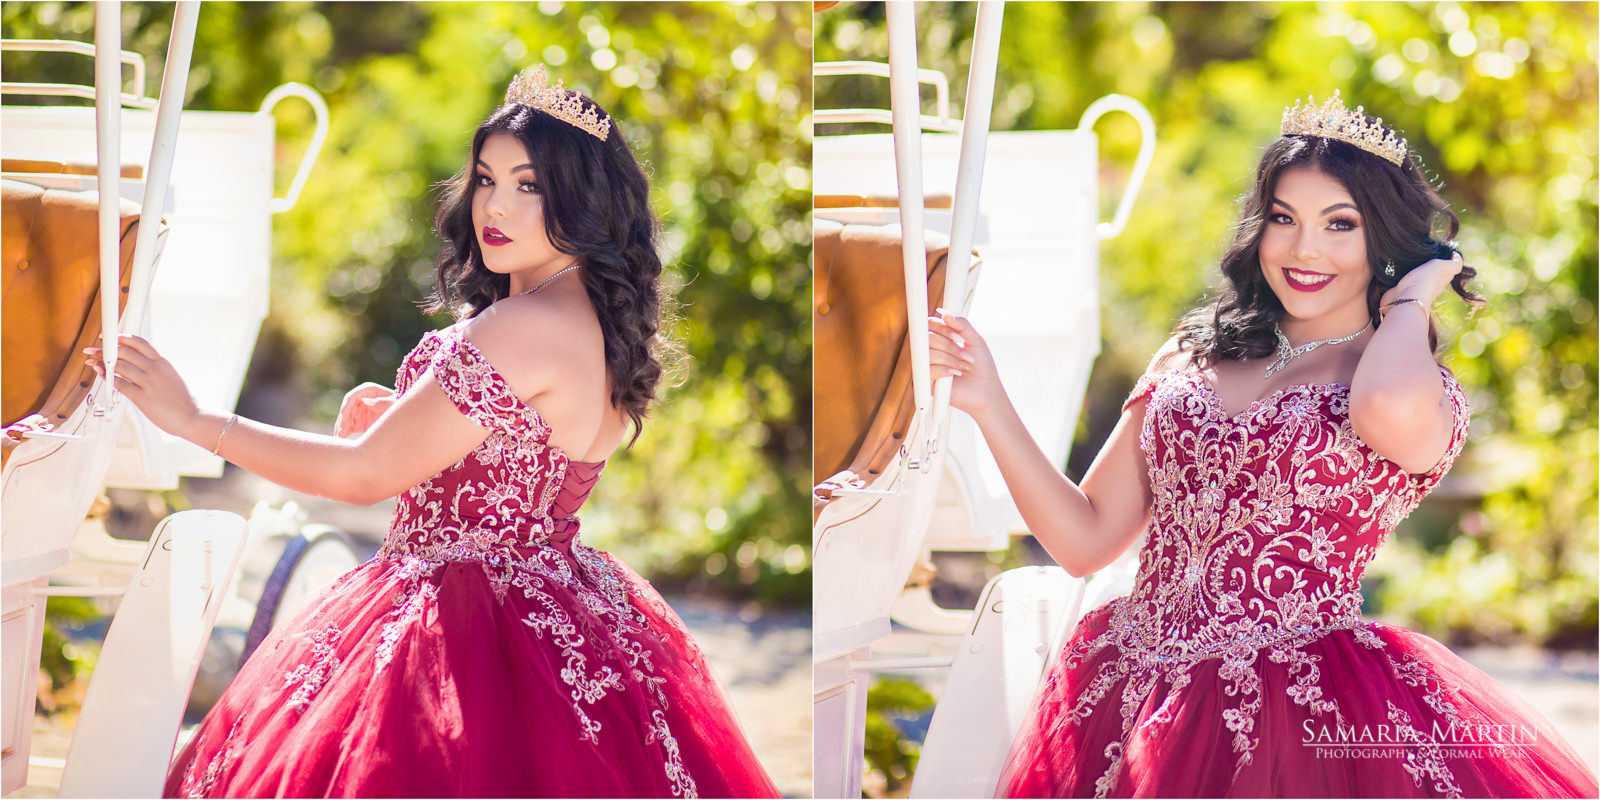 Sweet 16 Photos | SAMARIA MARTIN QUINCEANERA PHOTOGRAPHY AND DRESSES